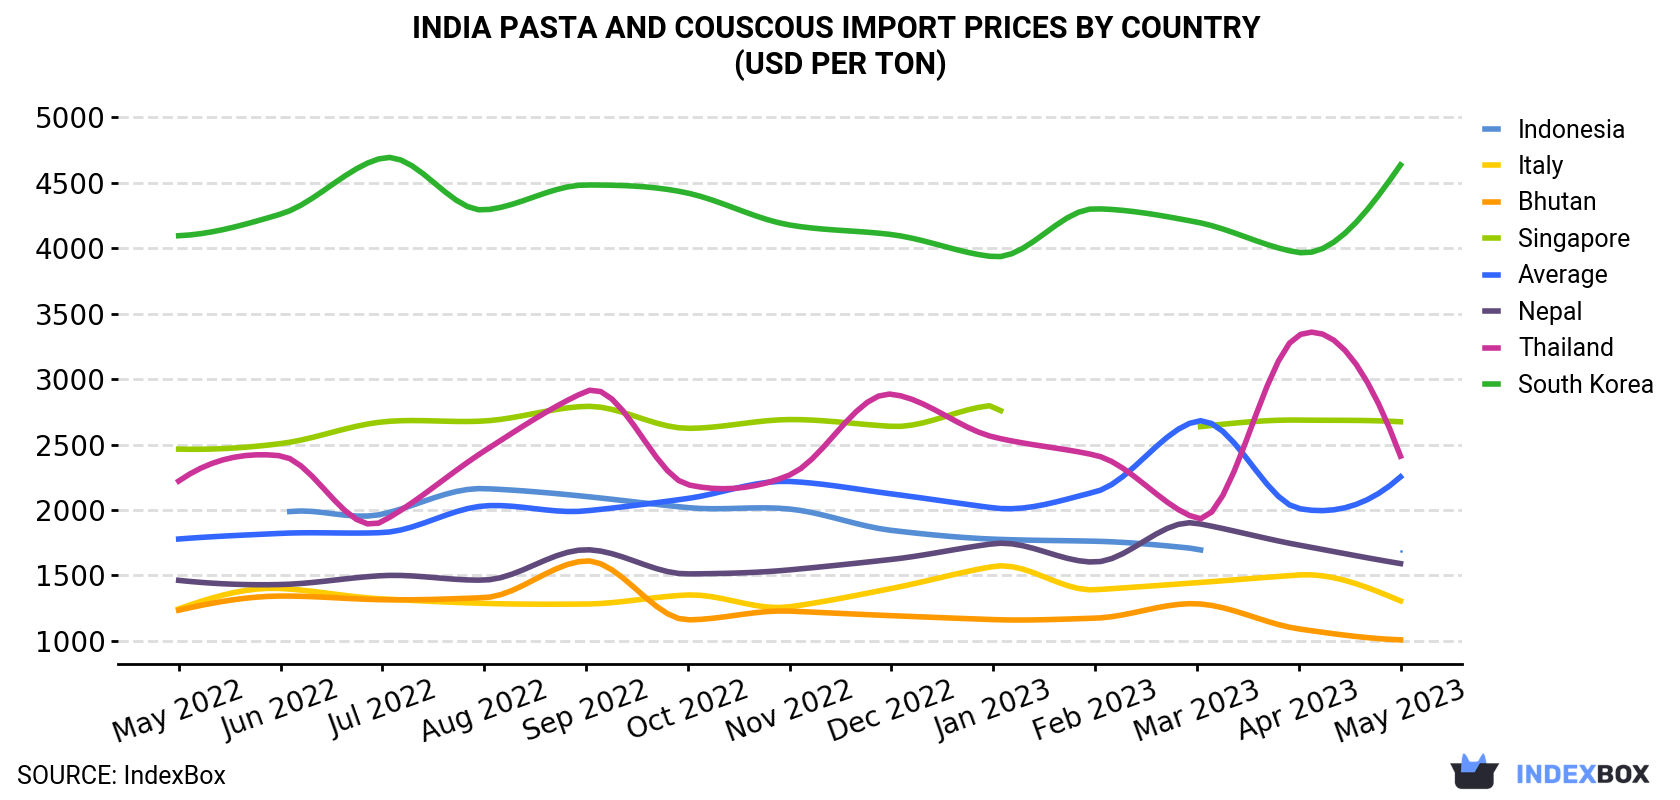 India Pasta And Couscous Import Prices By Country (USD Per Ton)